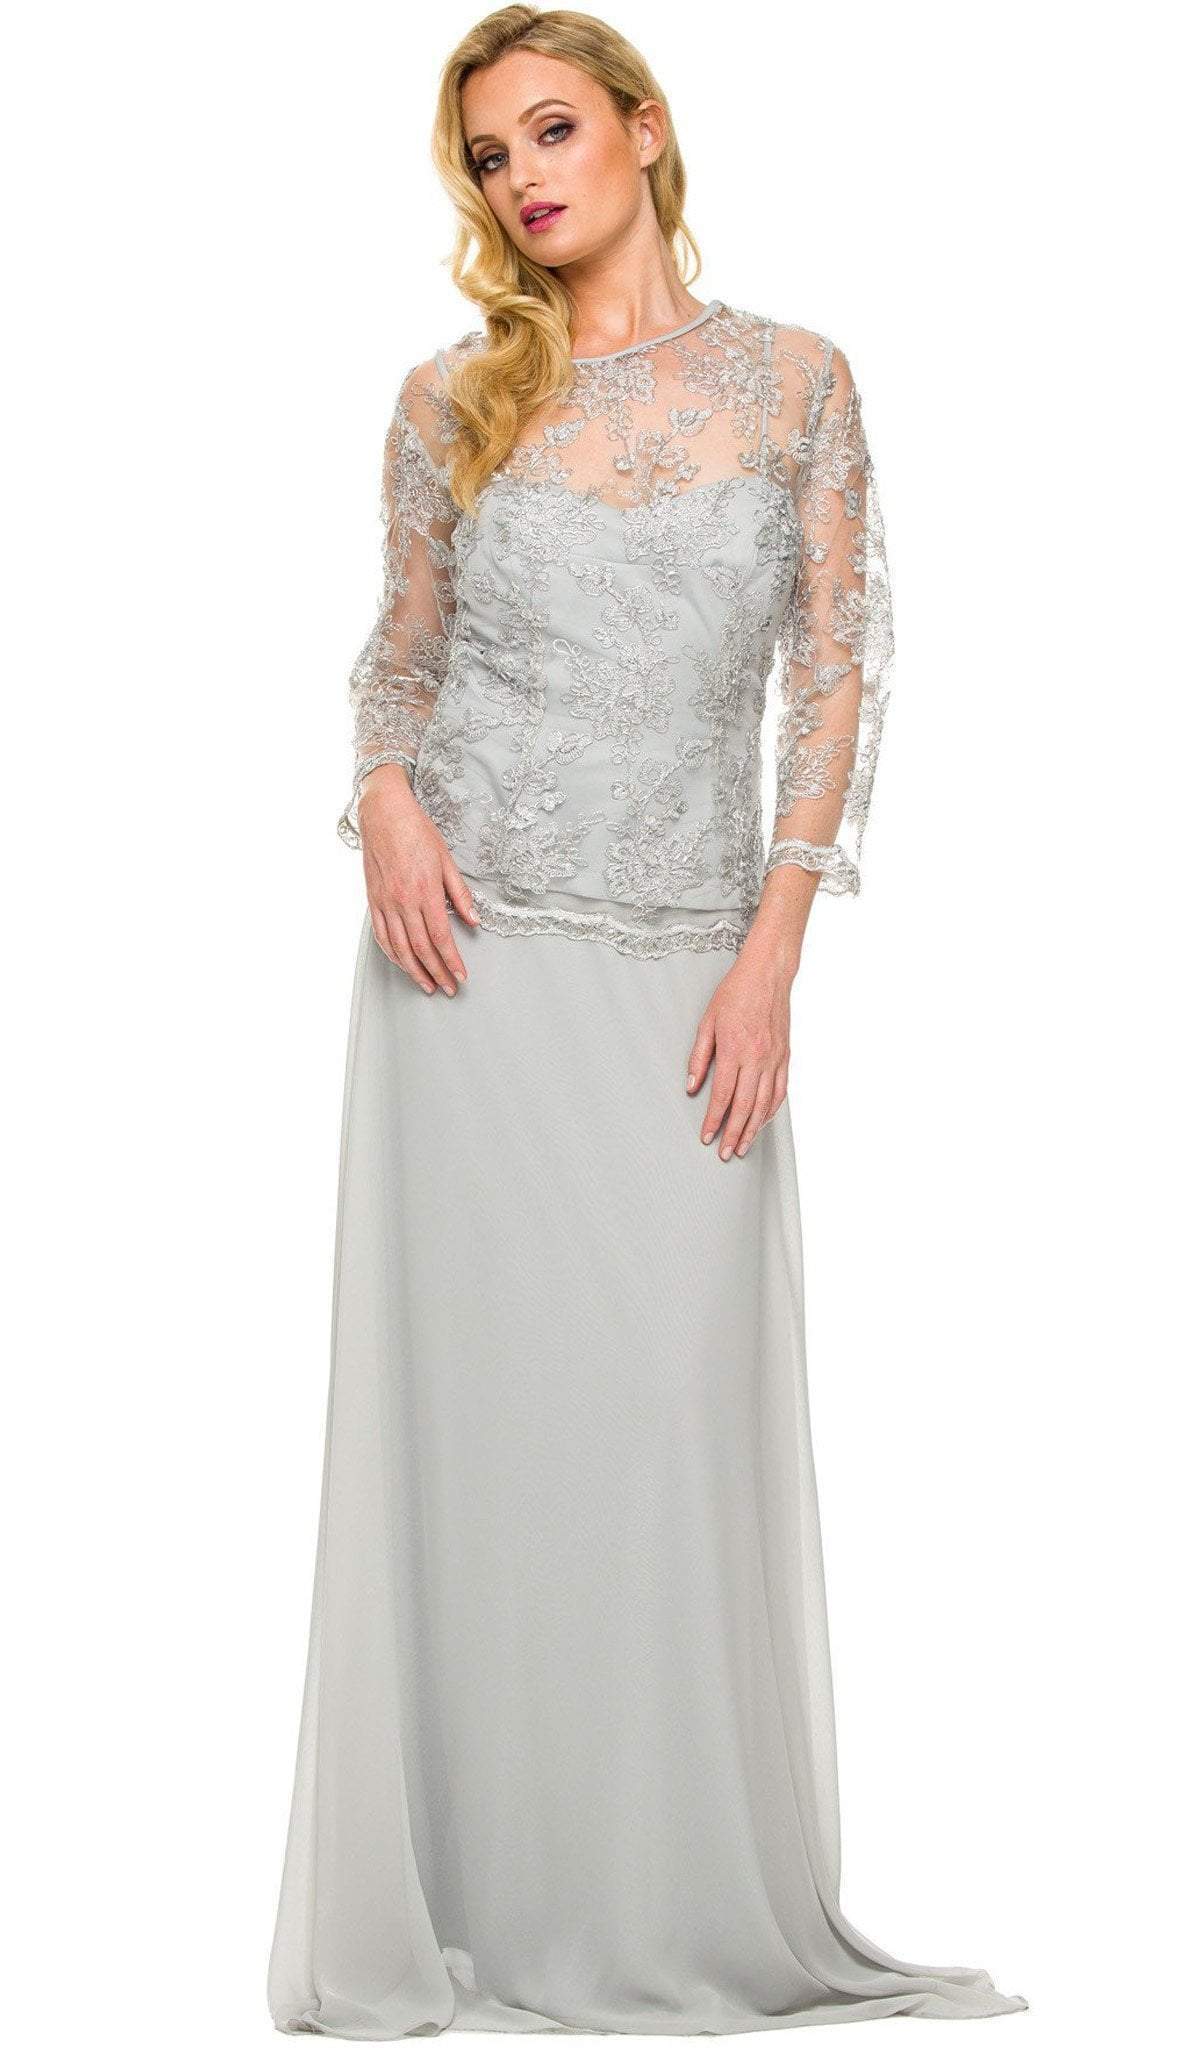 Nox Anabel - 5096 Sheer Lace Jewel Neck A-line Long Formal Dress Mother of the Bride Dresses M / Silver